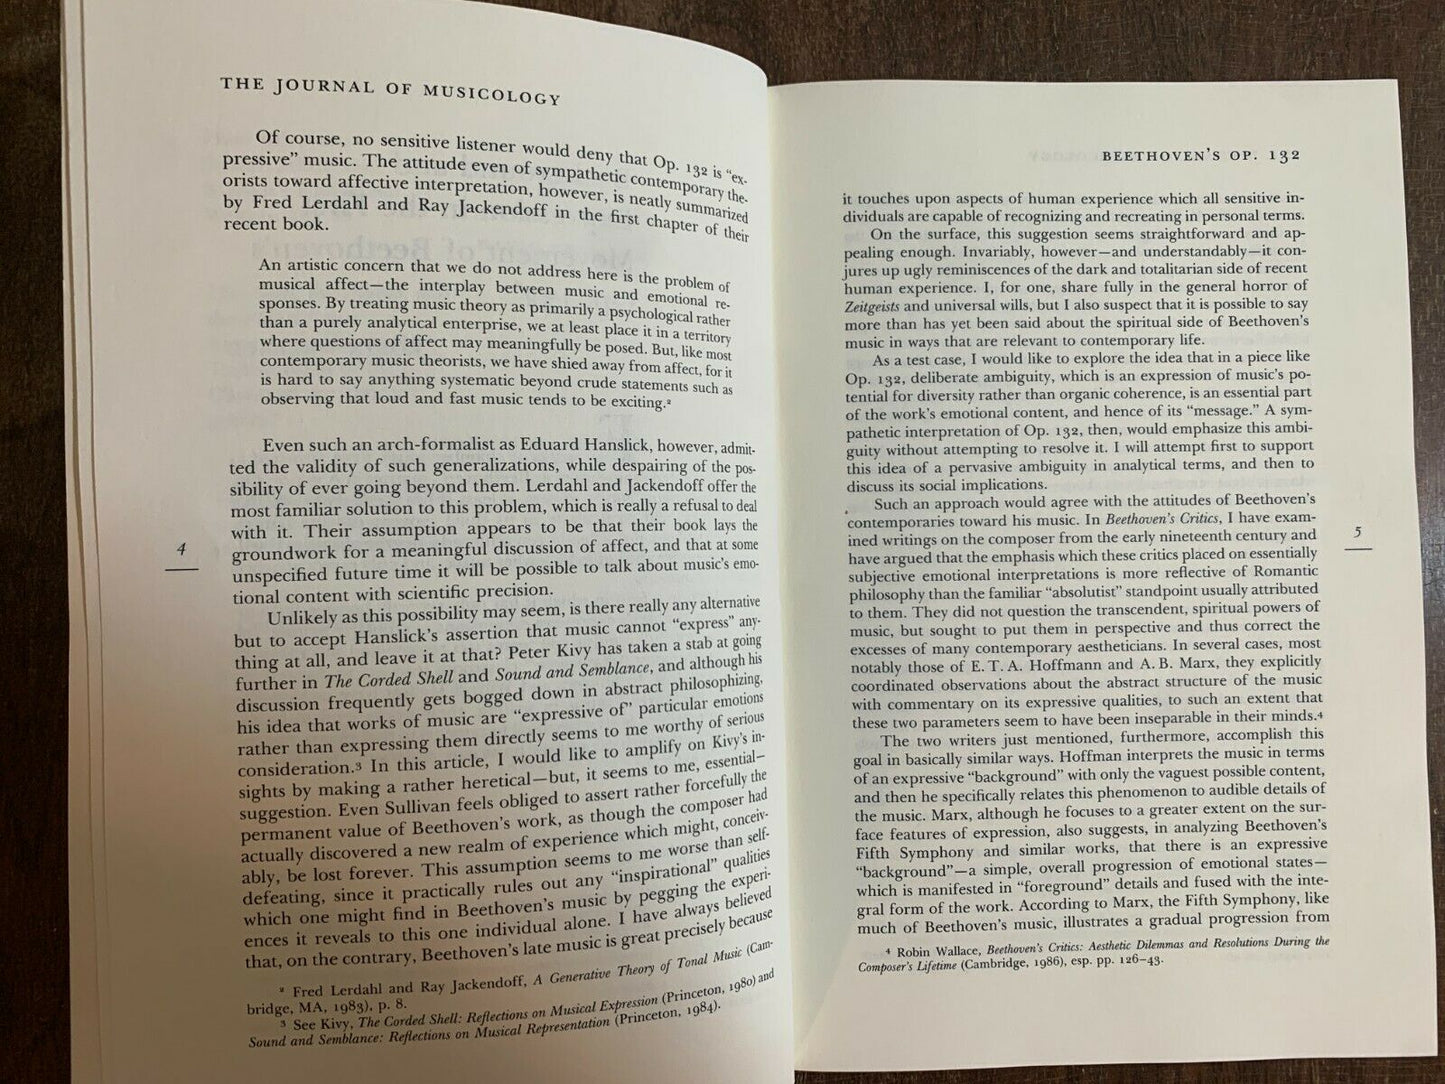 The Journal of Musicology, Review of Music, Winter 1989, Vol. VII, Number 1 (K7)